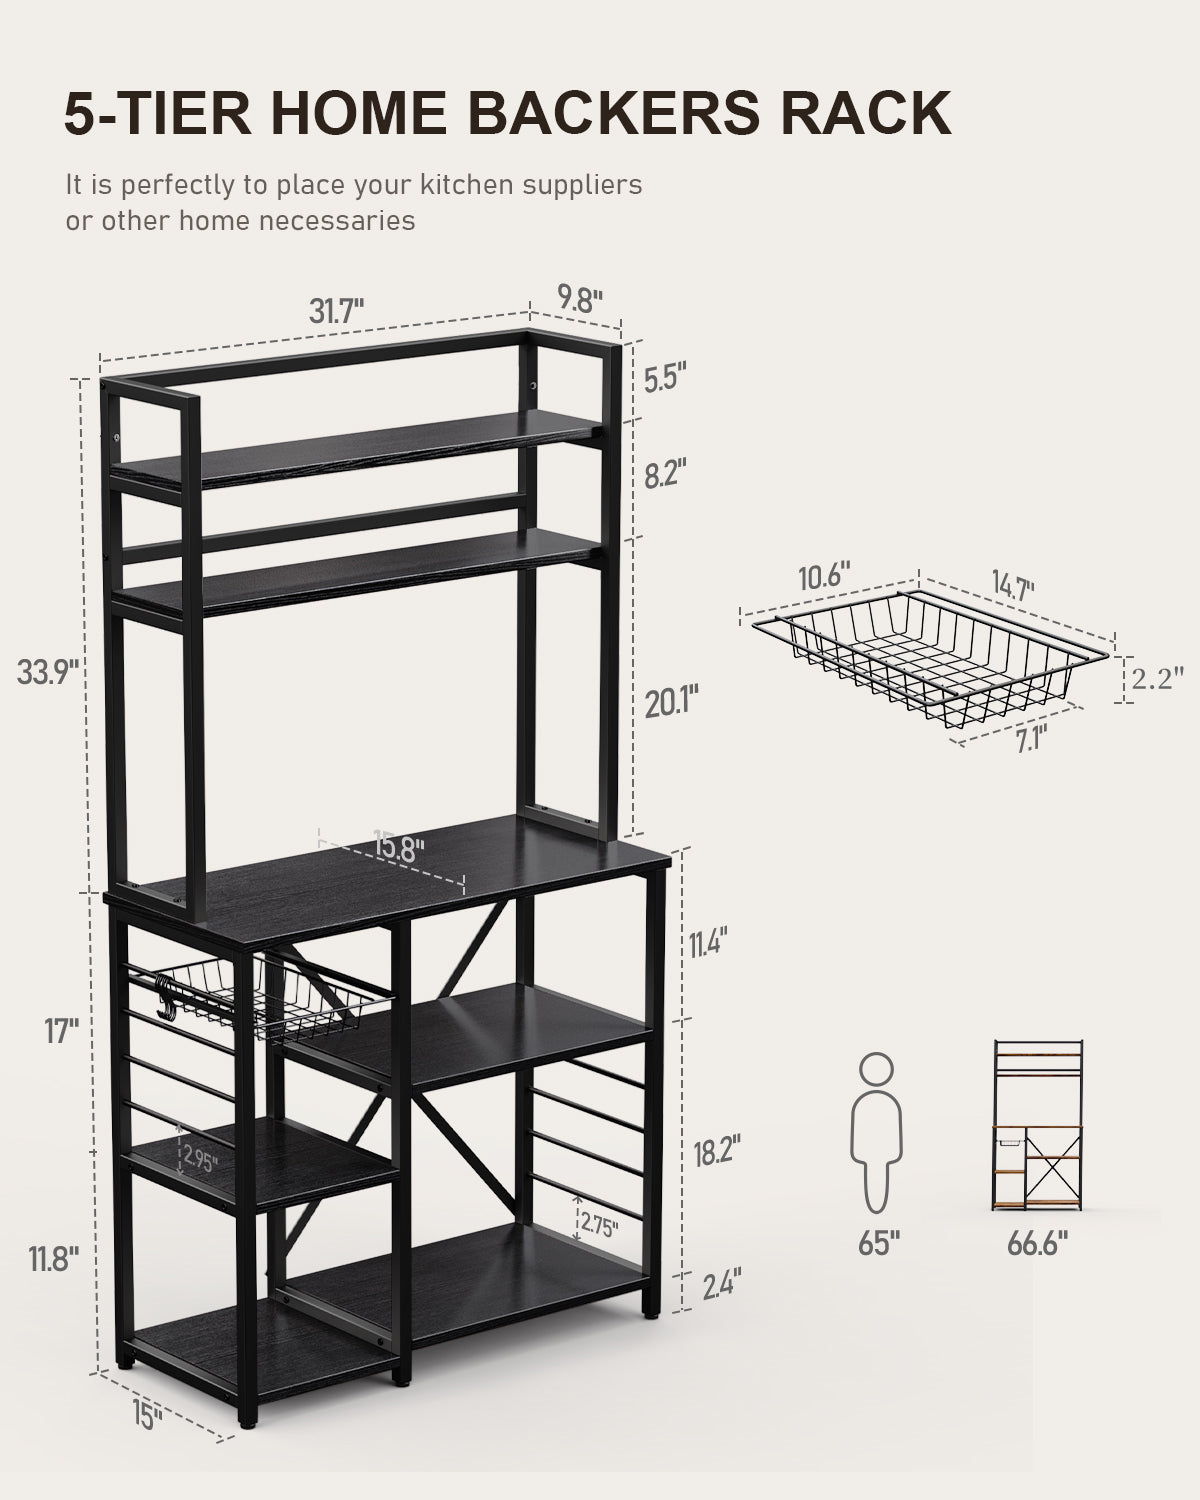 Gizoon FS11 Home 5-Tier Stand Shelf with with Basket & Side Hooks